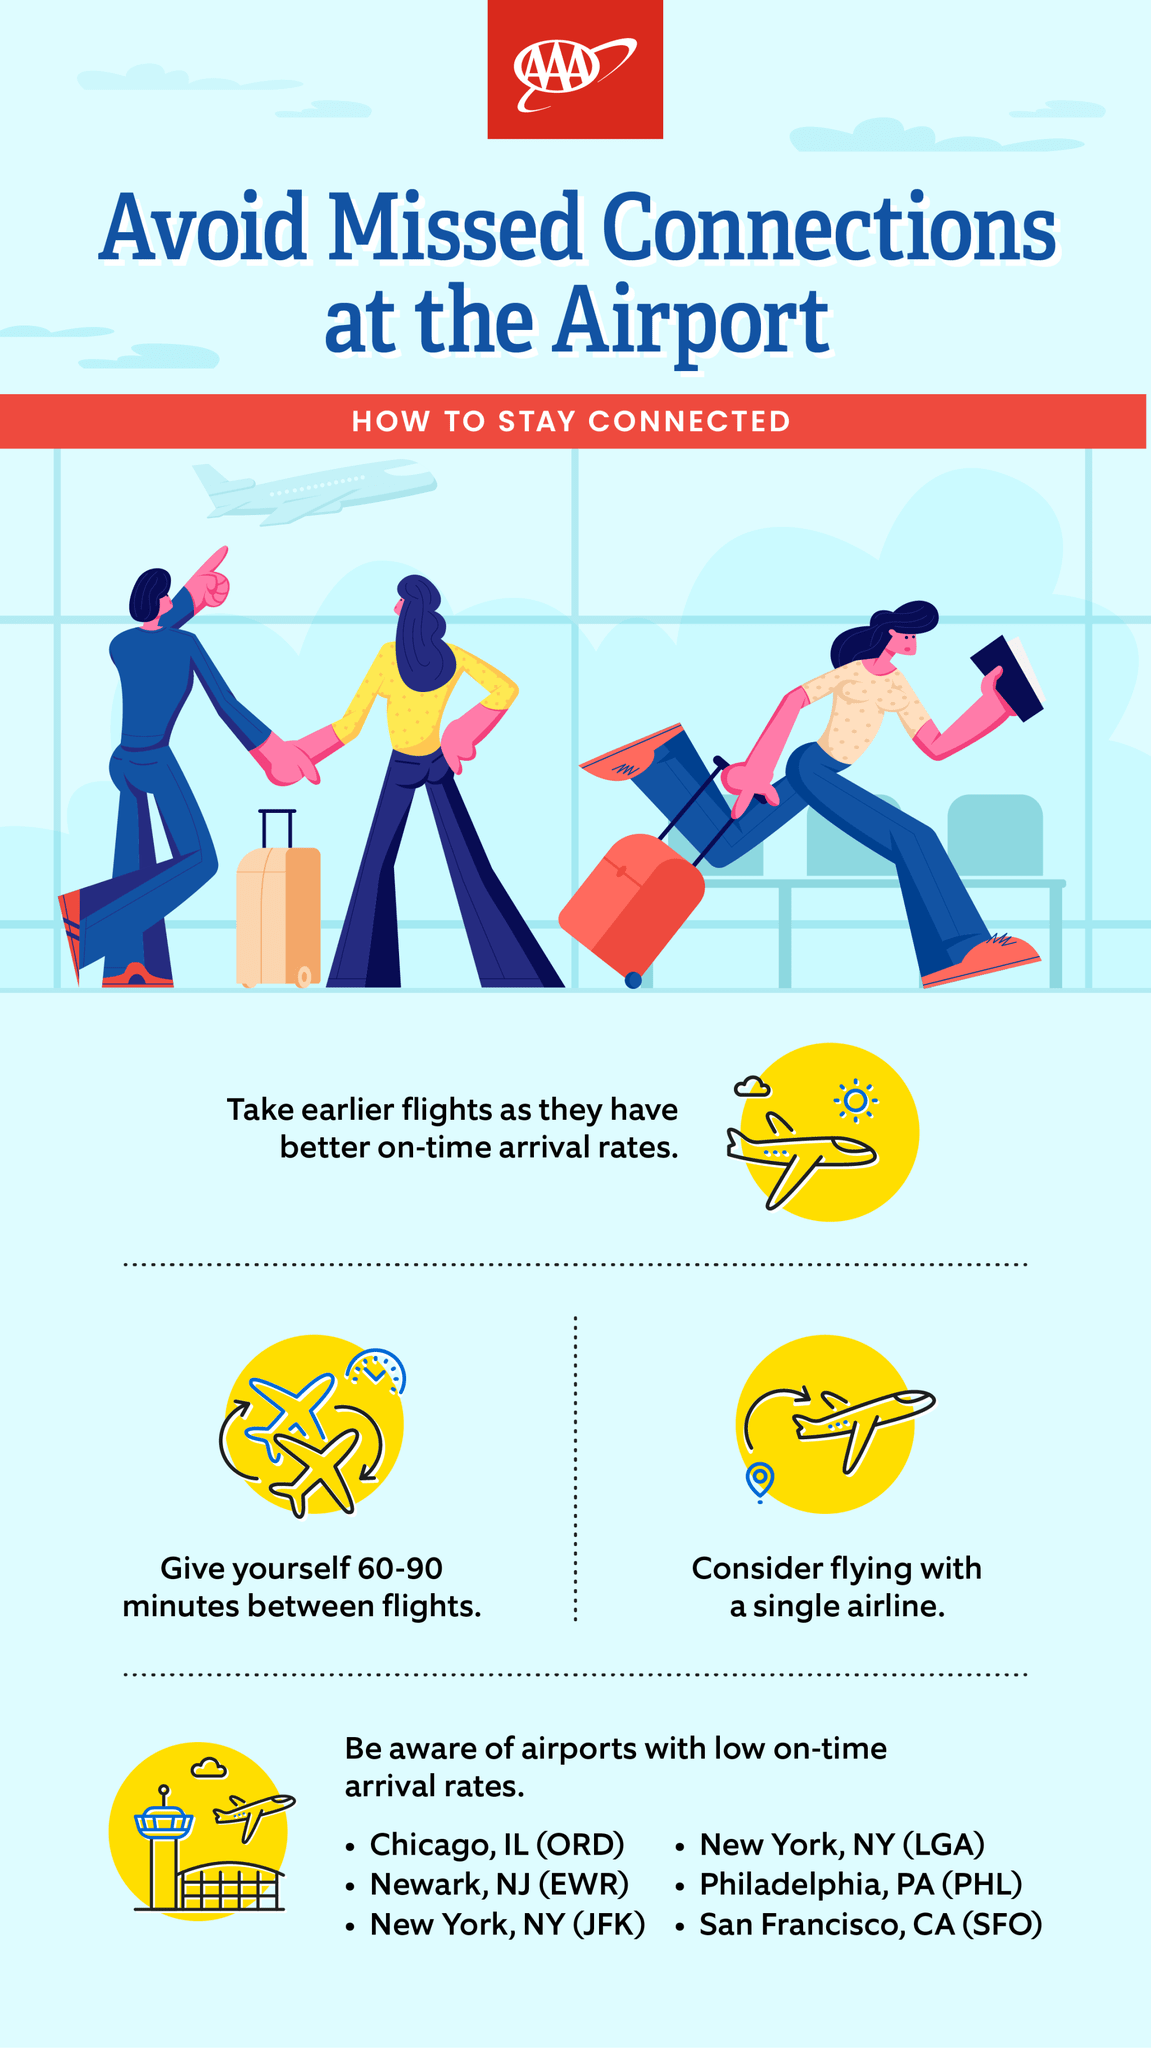 AAA Missed connection airport infographic